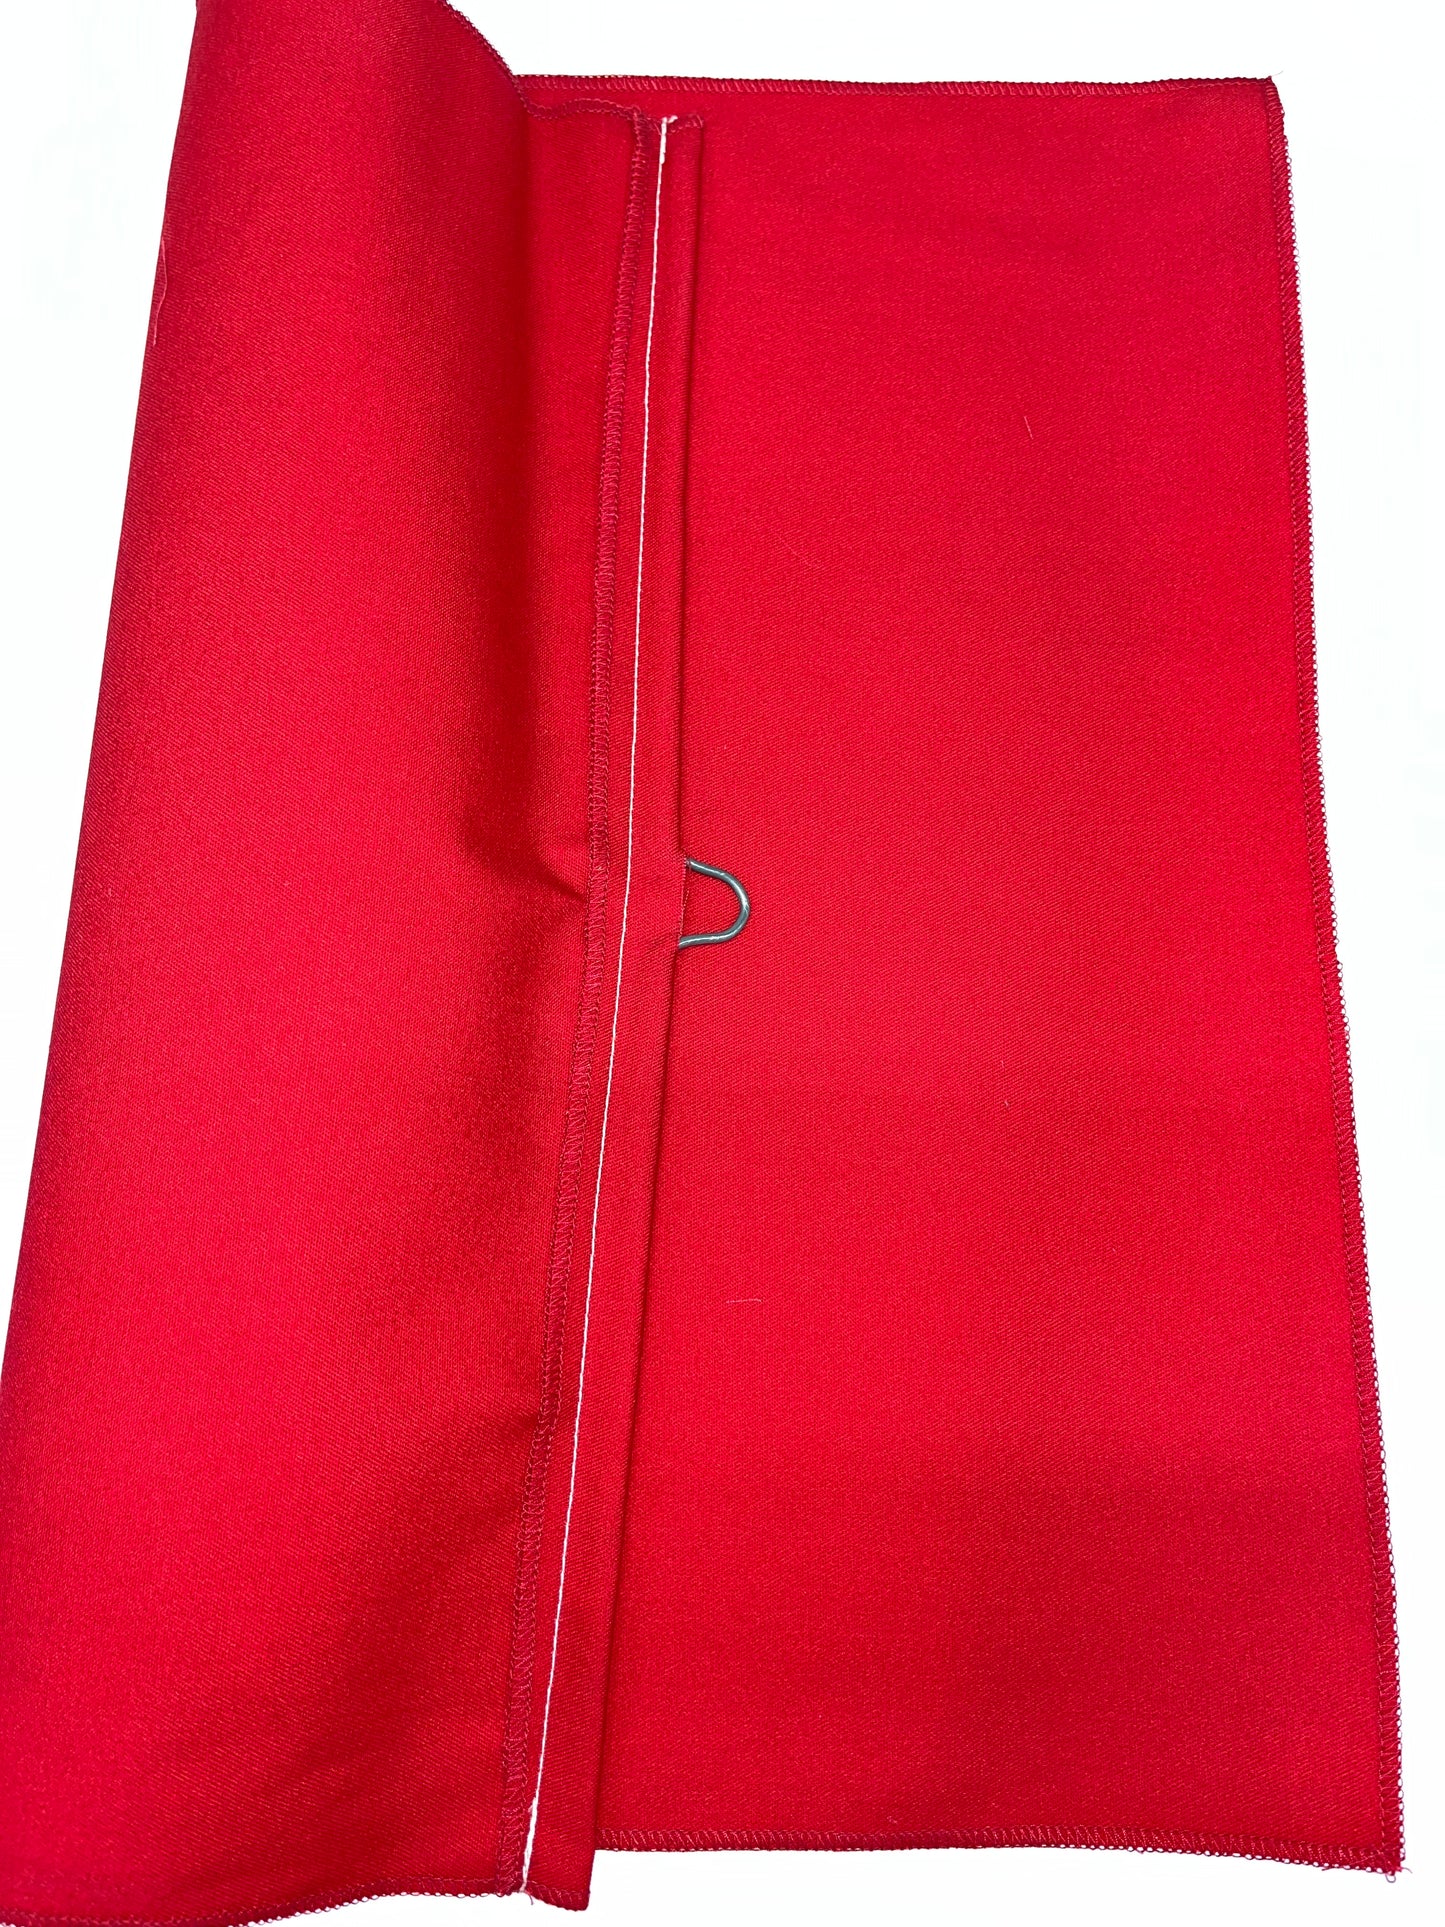 True Red Cloth Flag with Wire Spreader, 18"